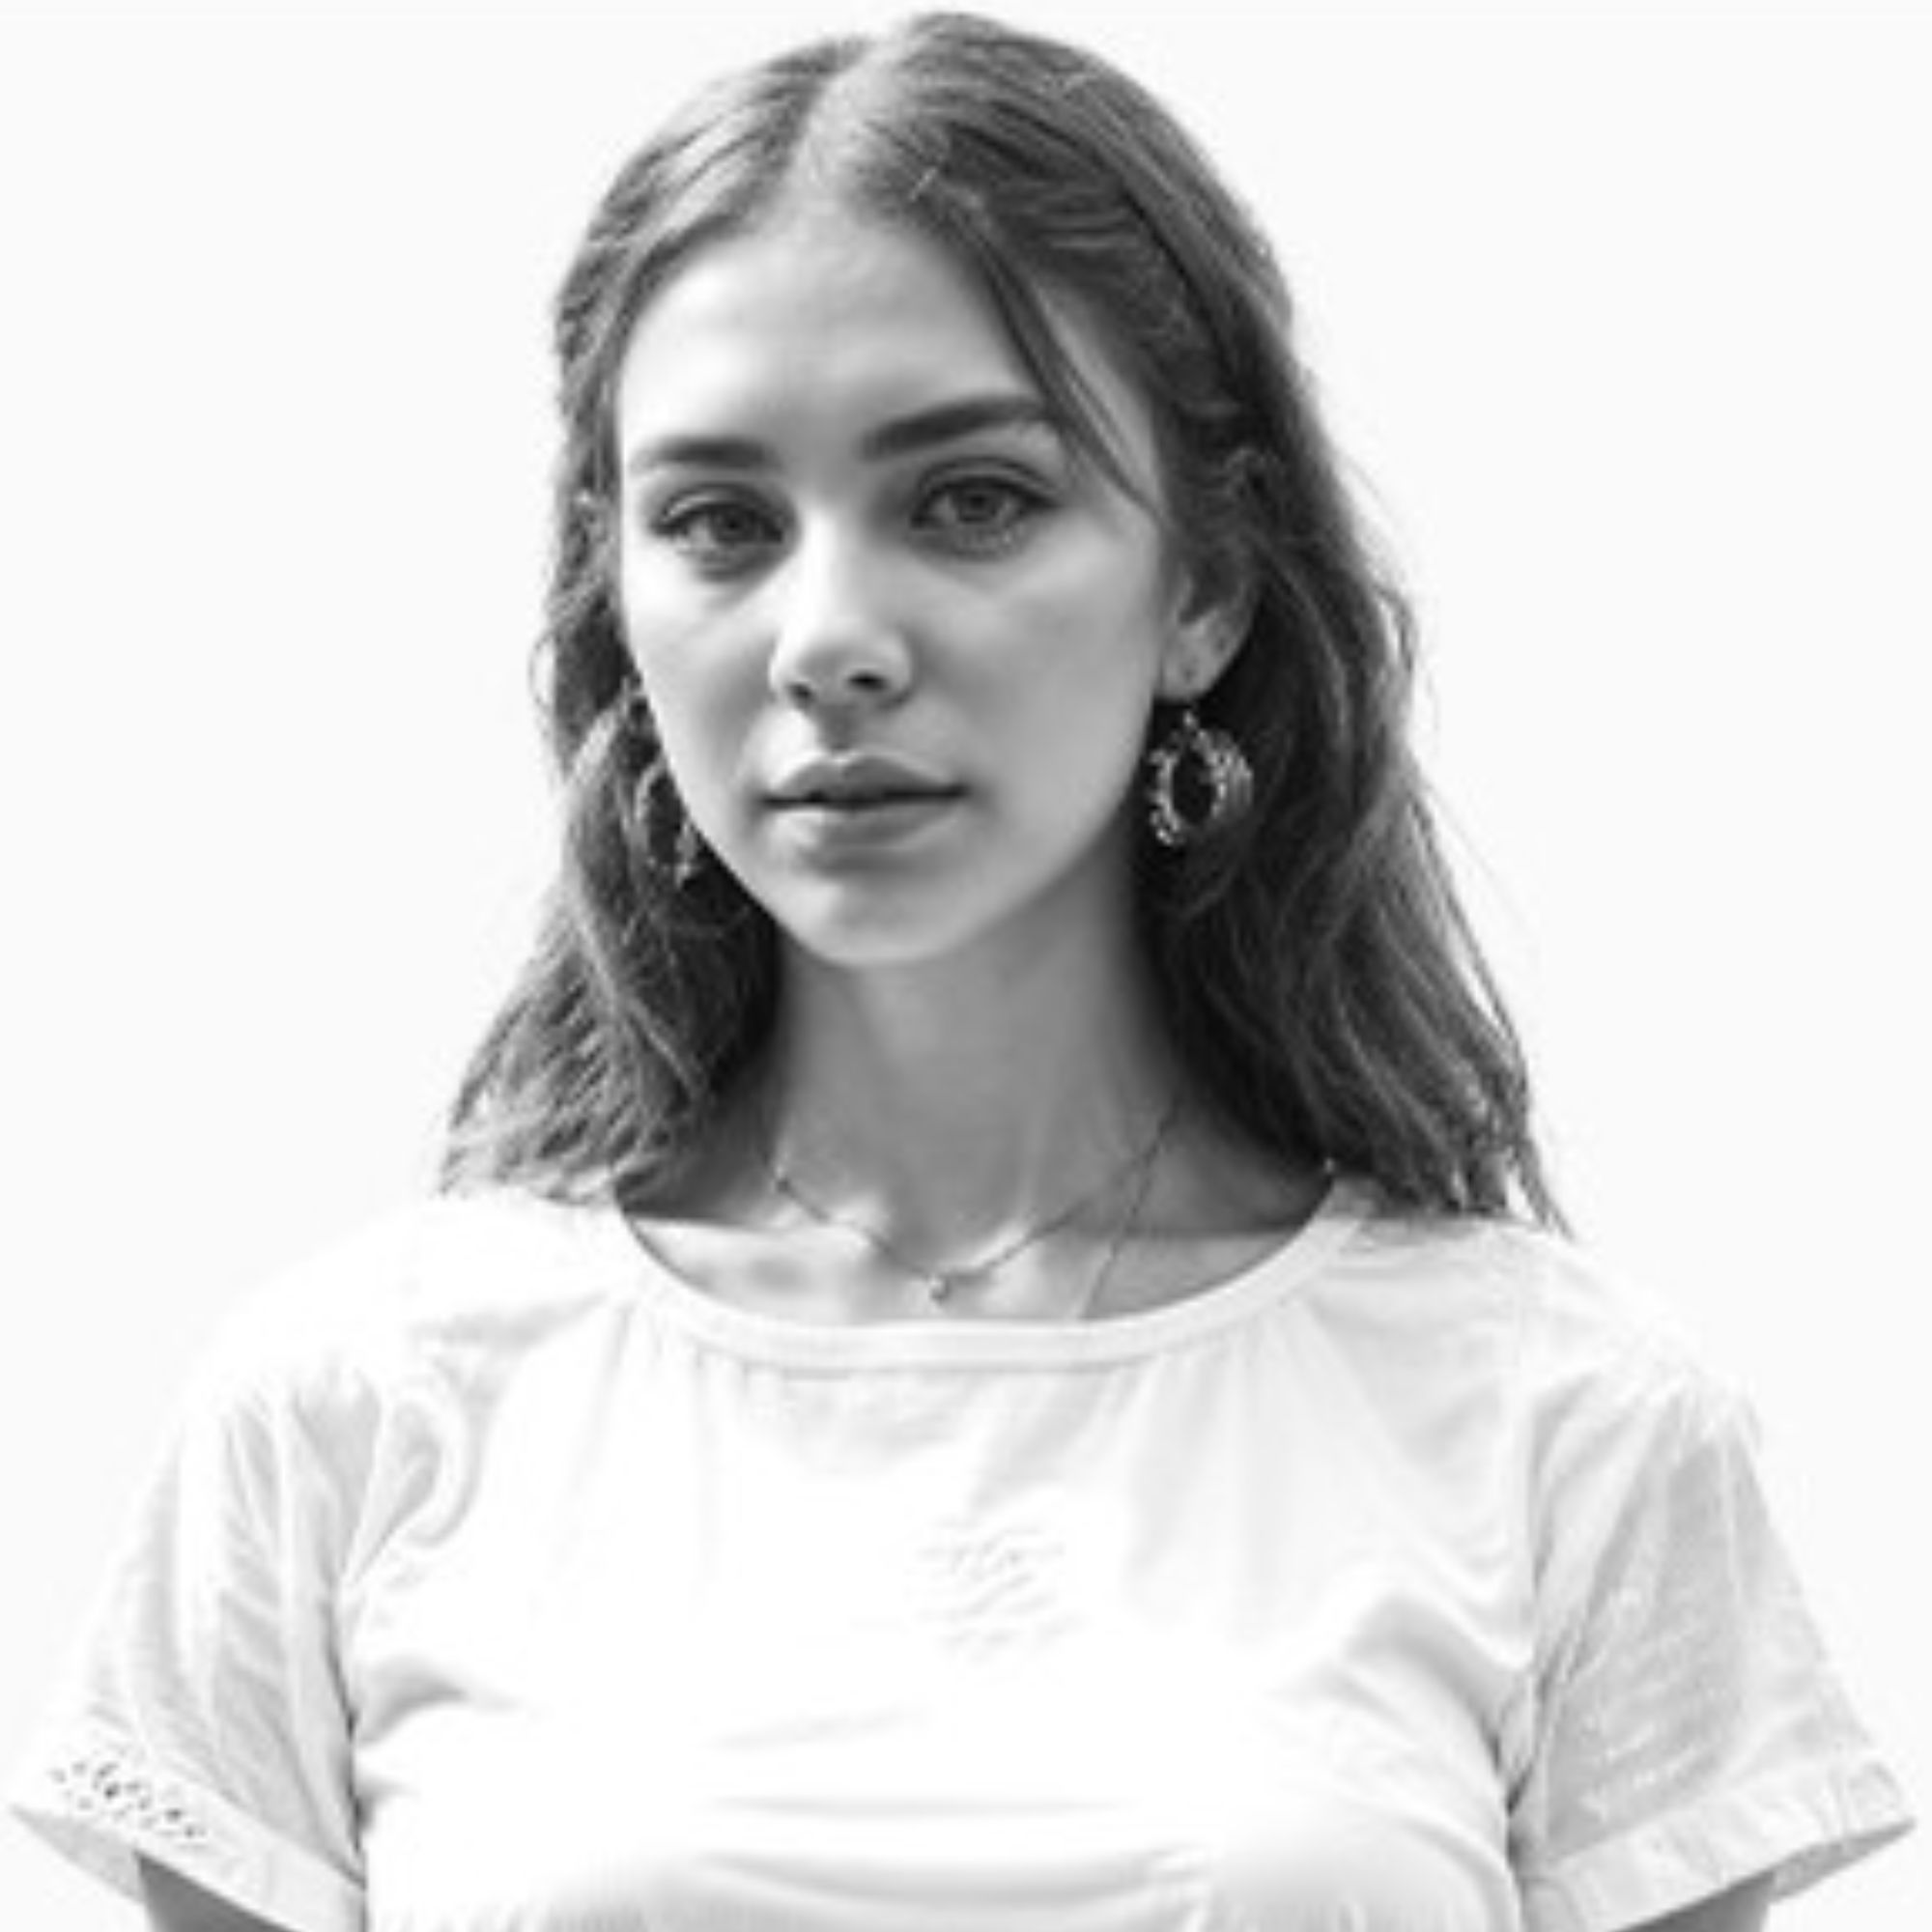 A black and white picture of Vera Lopez, a white woman wearing a white t-shirt